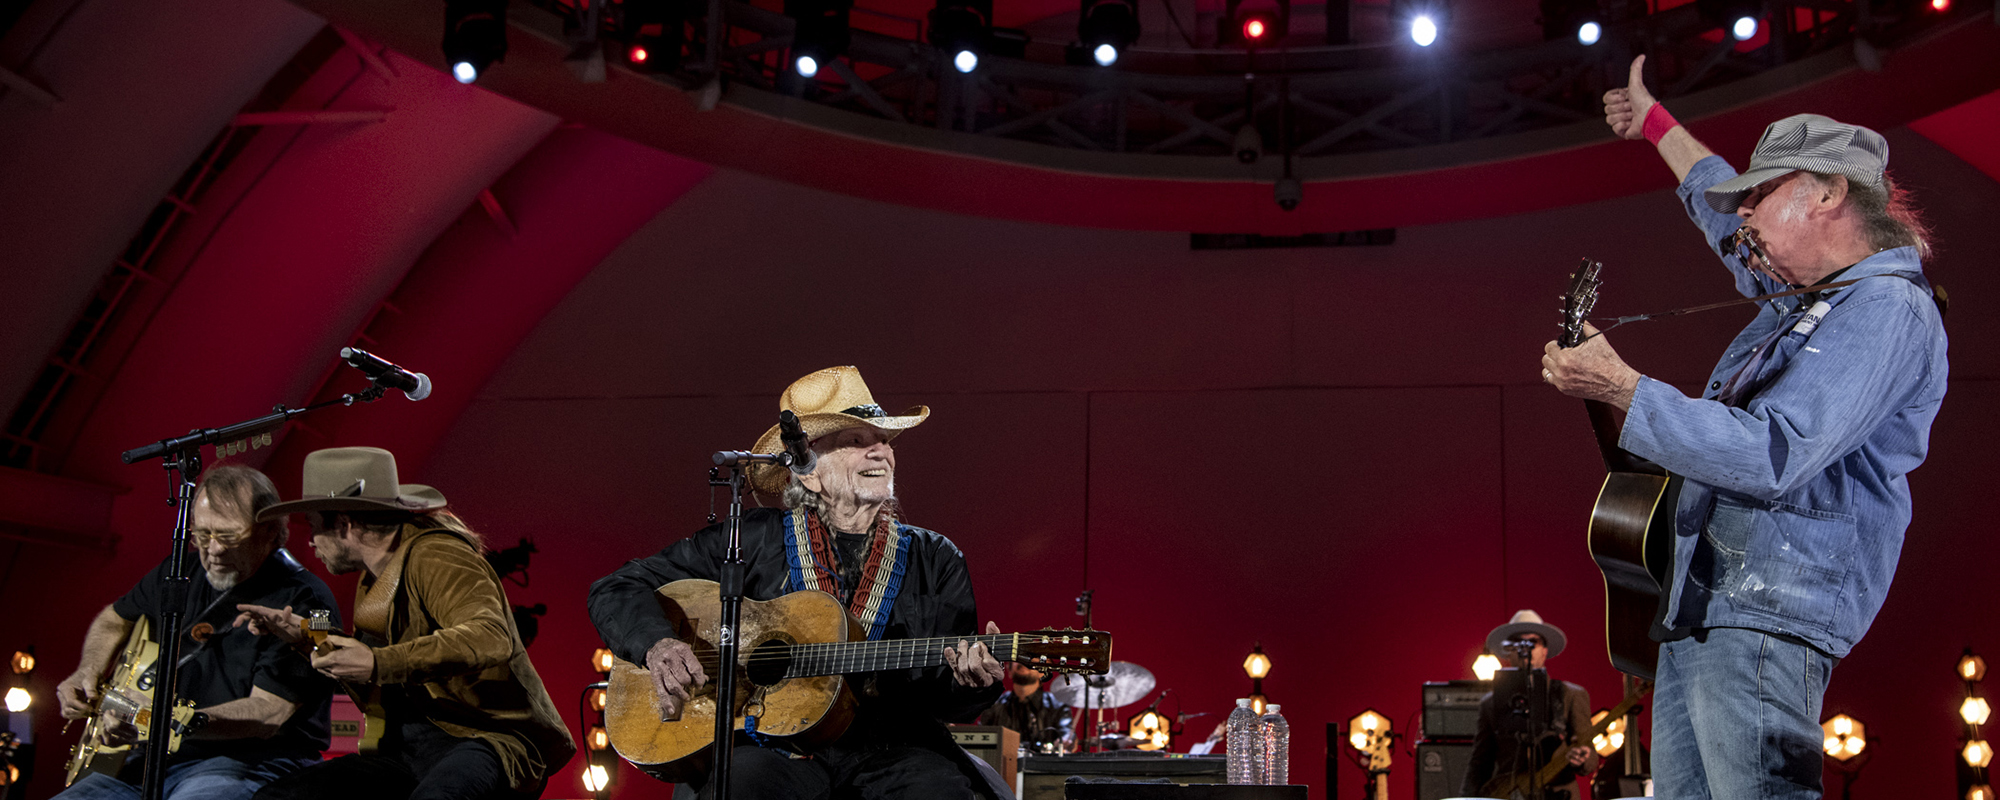 Neil Young, Stephen Stills, Snoop Dogg & More: Highlights From Night 1 of Willie Nelson’s 90th Birthday